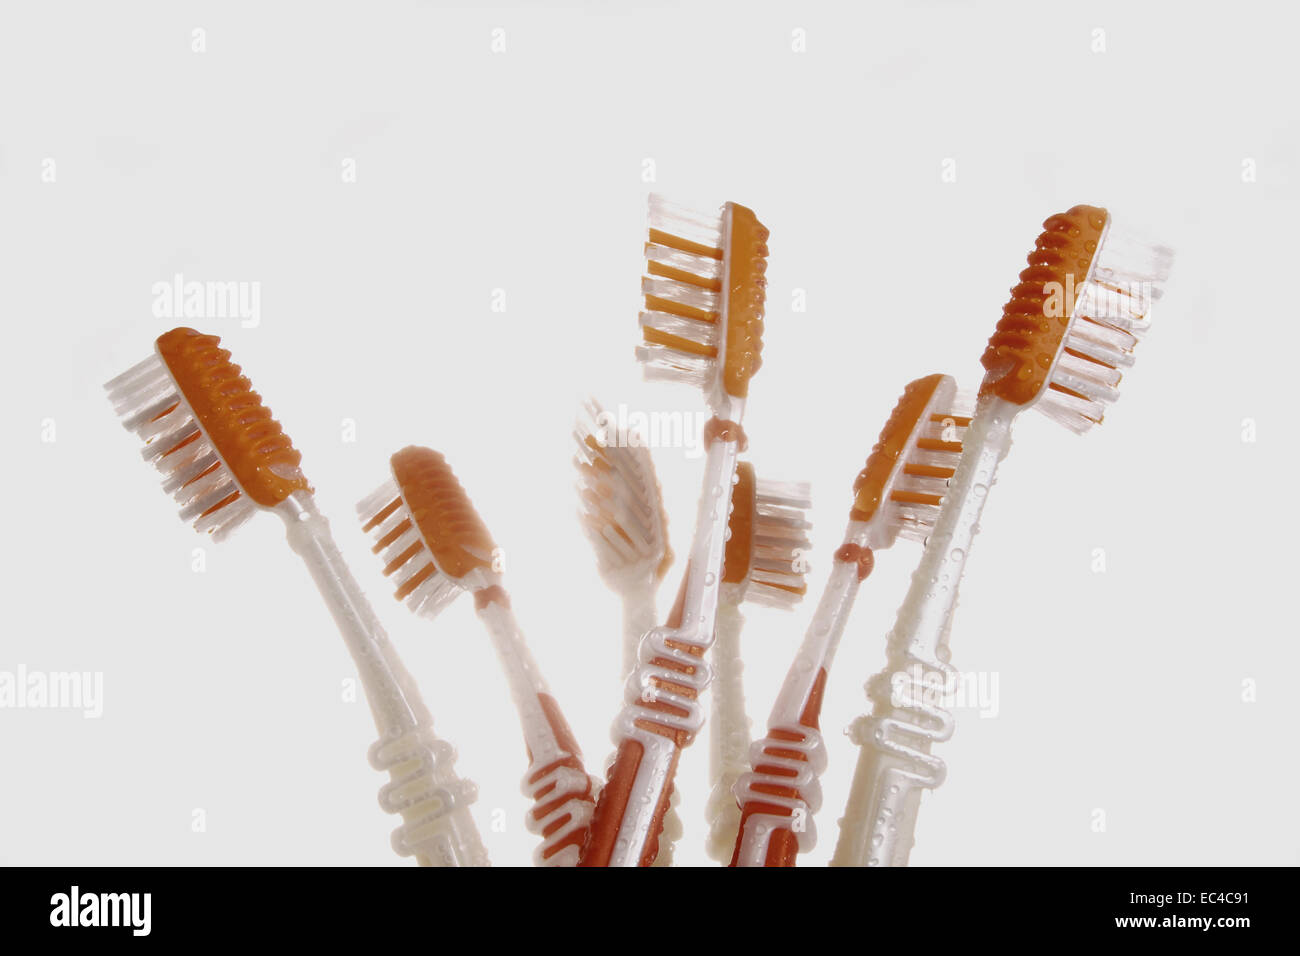 toothbrushes Stock Photo